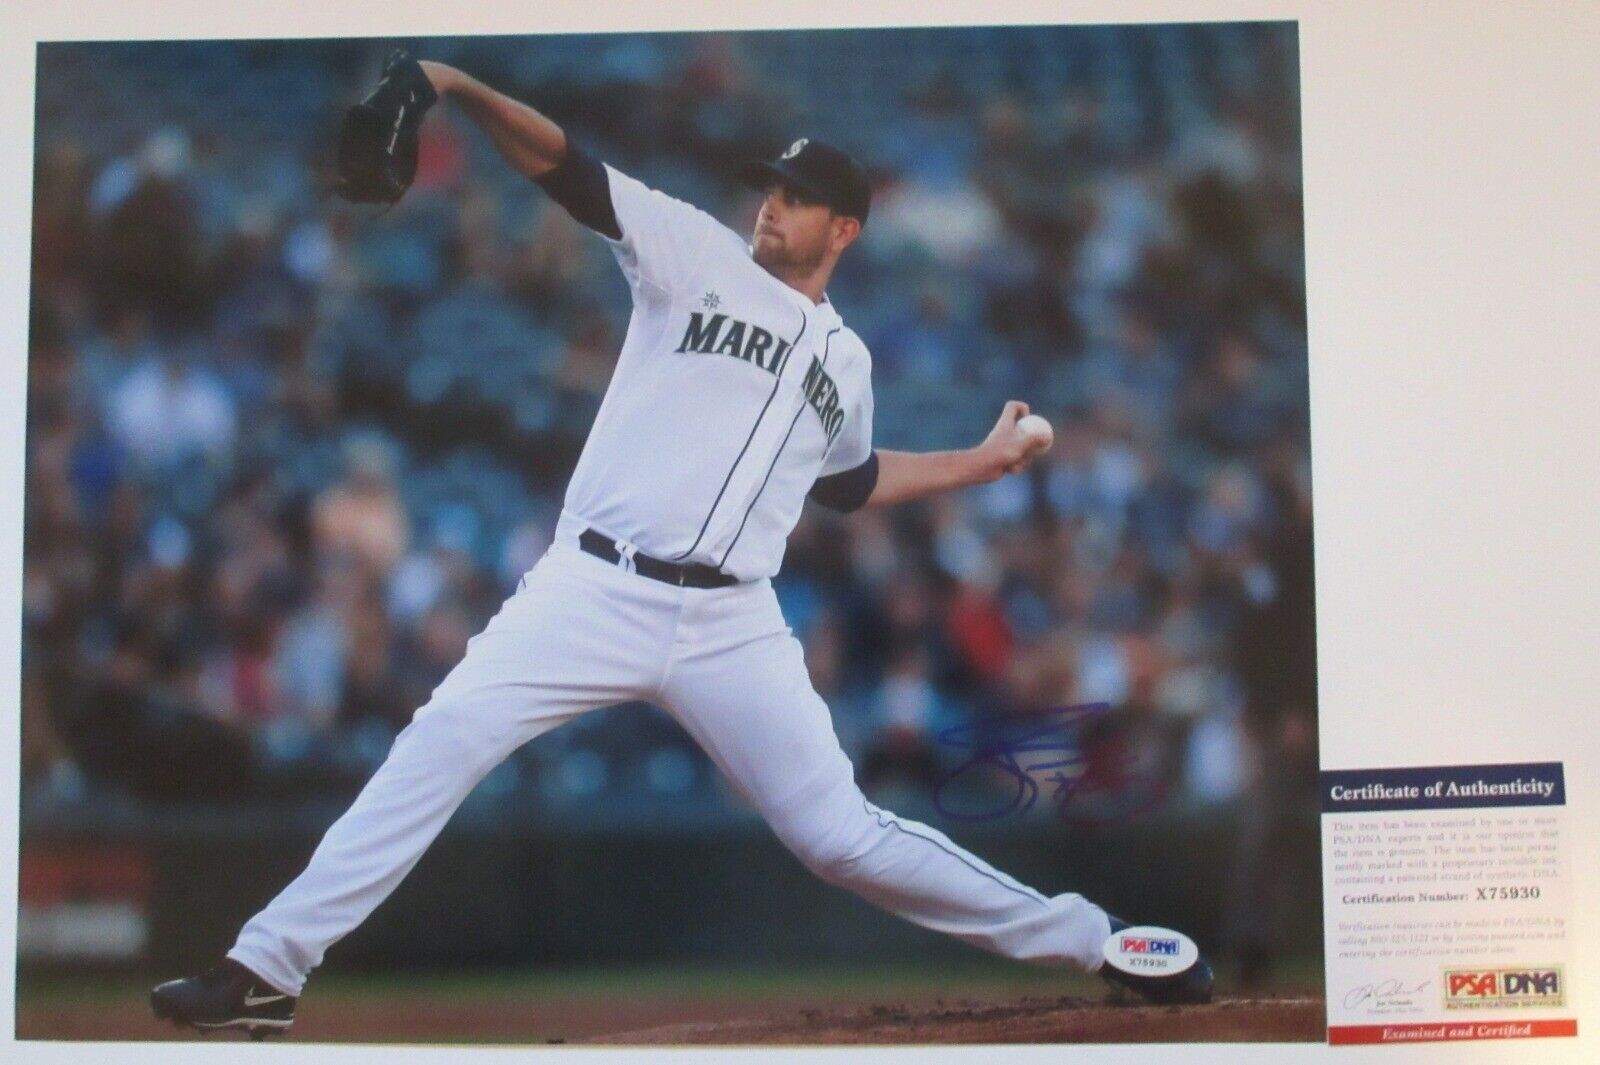 THE BIG MAPLE!!! James Paxton Signed SEATTLE MARINERS 11x14 Photo Poster painting #1 PSA/DNA